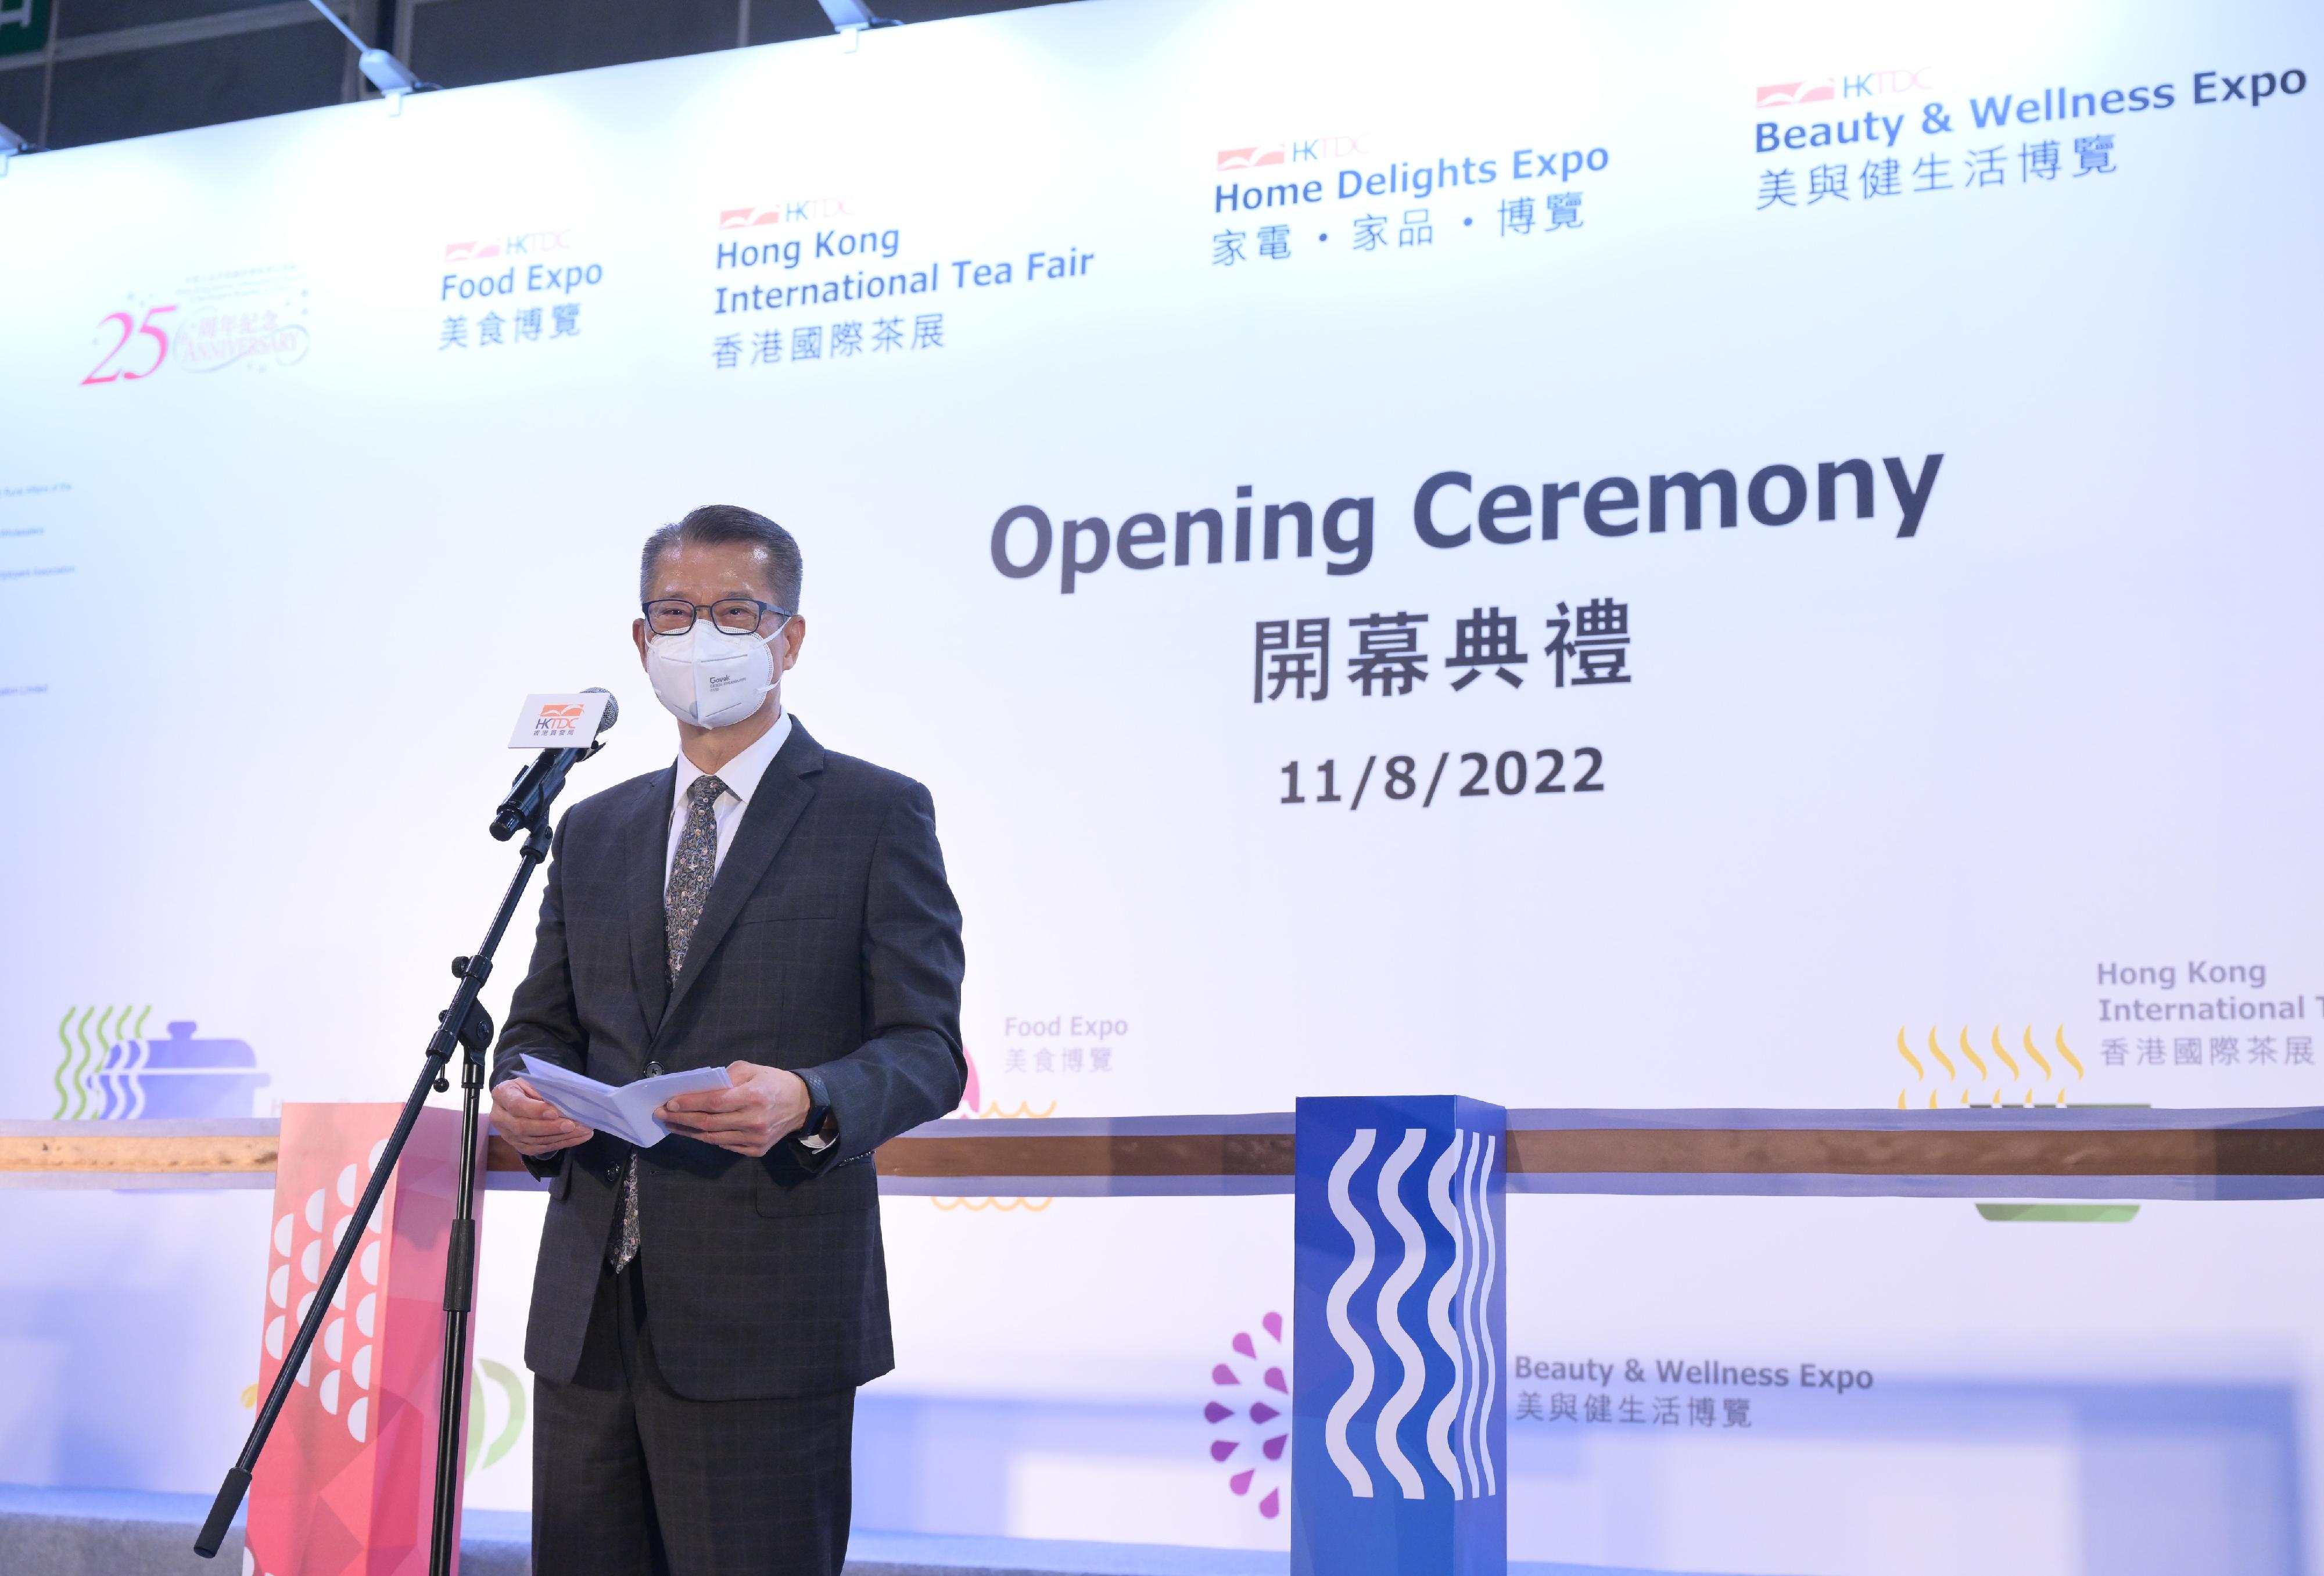 The Financial Secretary, Mr Paul Chan, speaks at the Joint Opening Ceremony of the Hong Kong Trade Development Council Food Expo, Hong Kong International Tea Fair, Home Delights Expo and Beauty & Wellness Expo today (August 11).